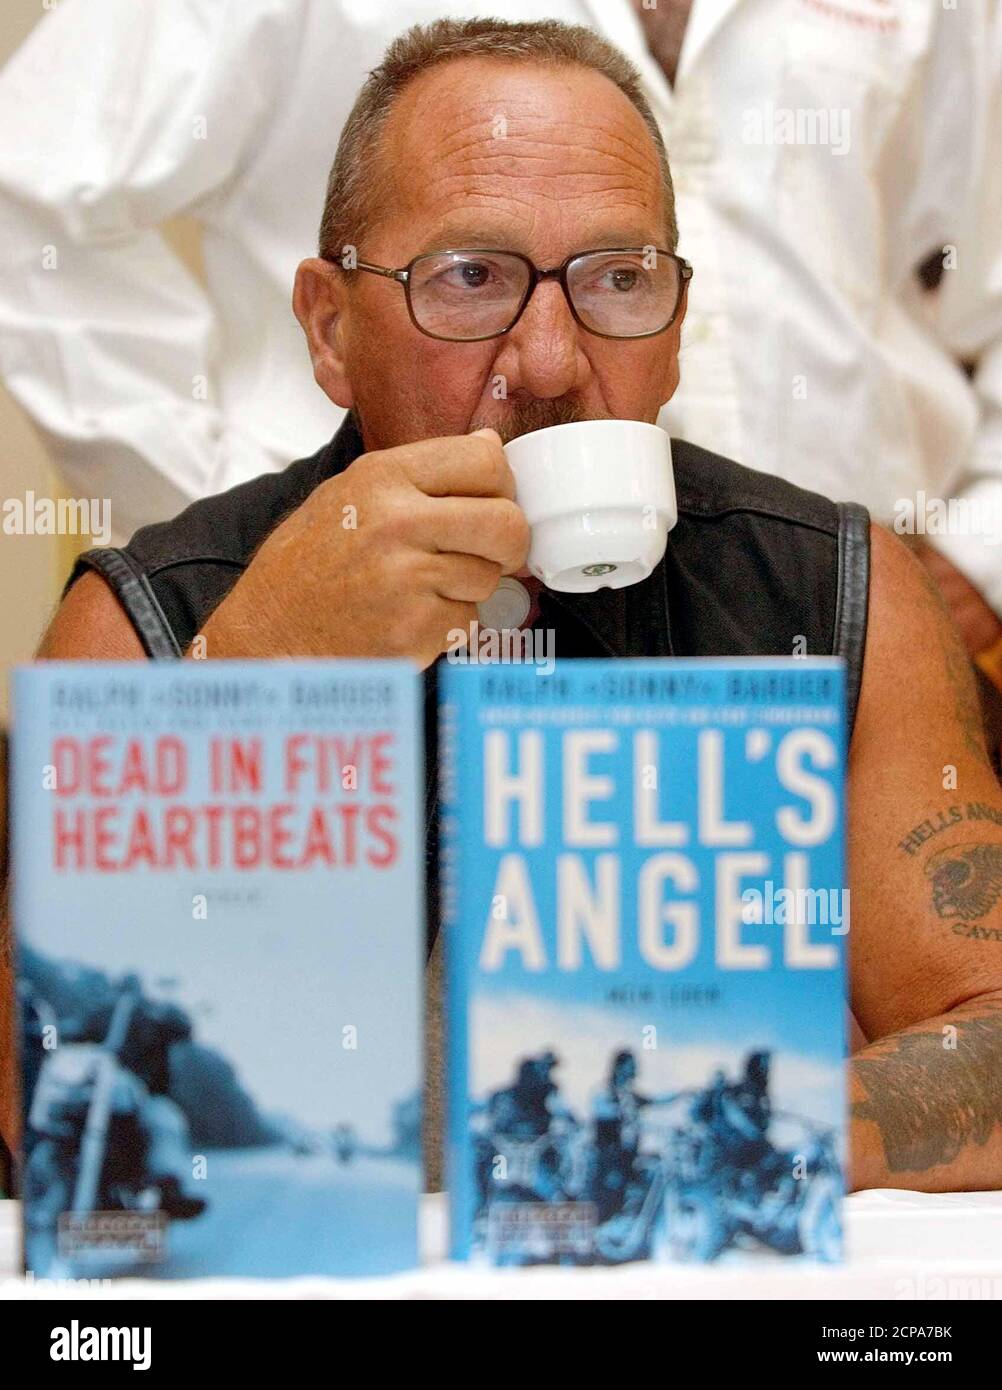 Legendary Hell's Angel Ralph 'Sonny' Barger drinks a cup of coffee during a news conference in Vienna September 3, 2003. Barger, who has spent more than 40 years as a member of the most infamous motorcycle club in the world and was its de facto leader during the 1960s and 1970s, is promoting his new book 'Dead in five heartbeats', his first novel following two documentary Hell's Angels books. REUTERS/Heinz-Peter Bader  HPB/ Stock Photo